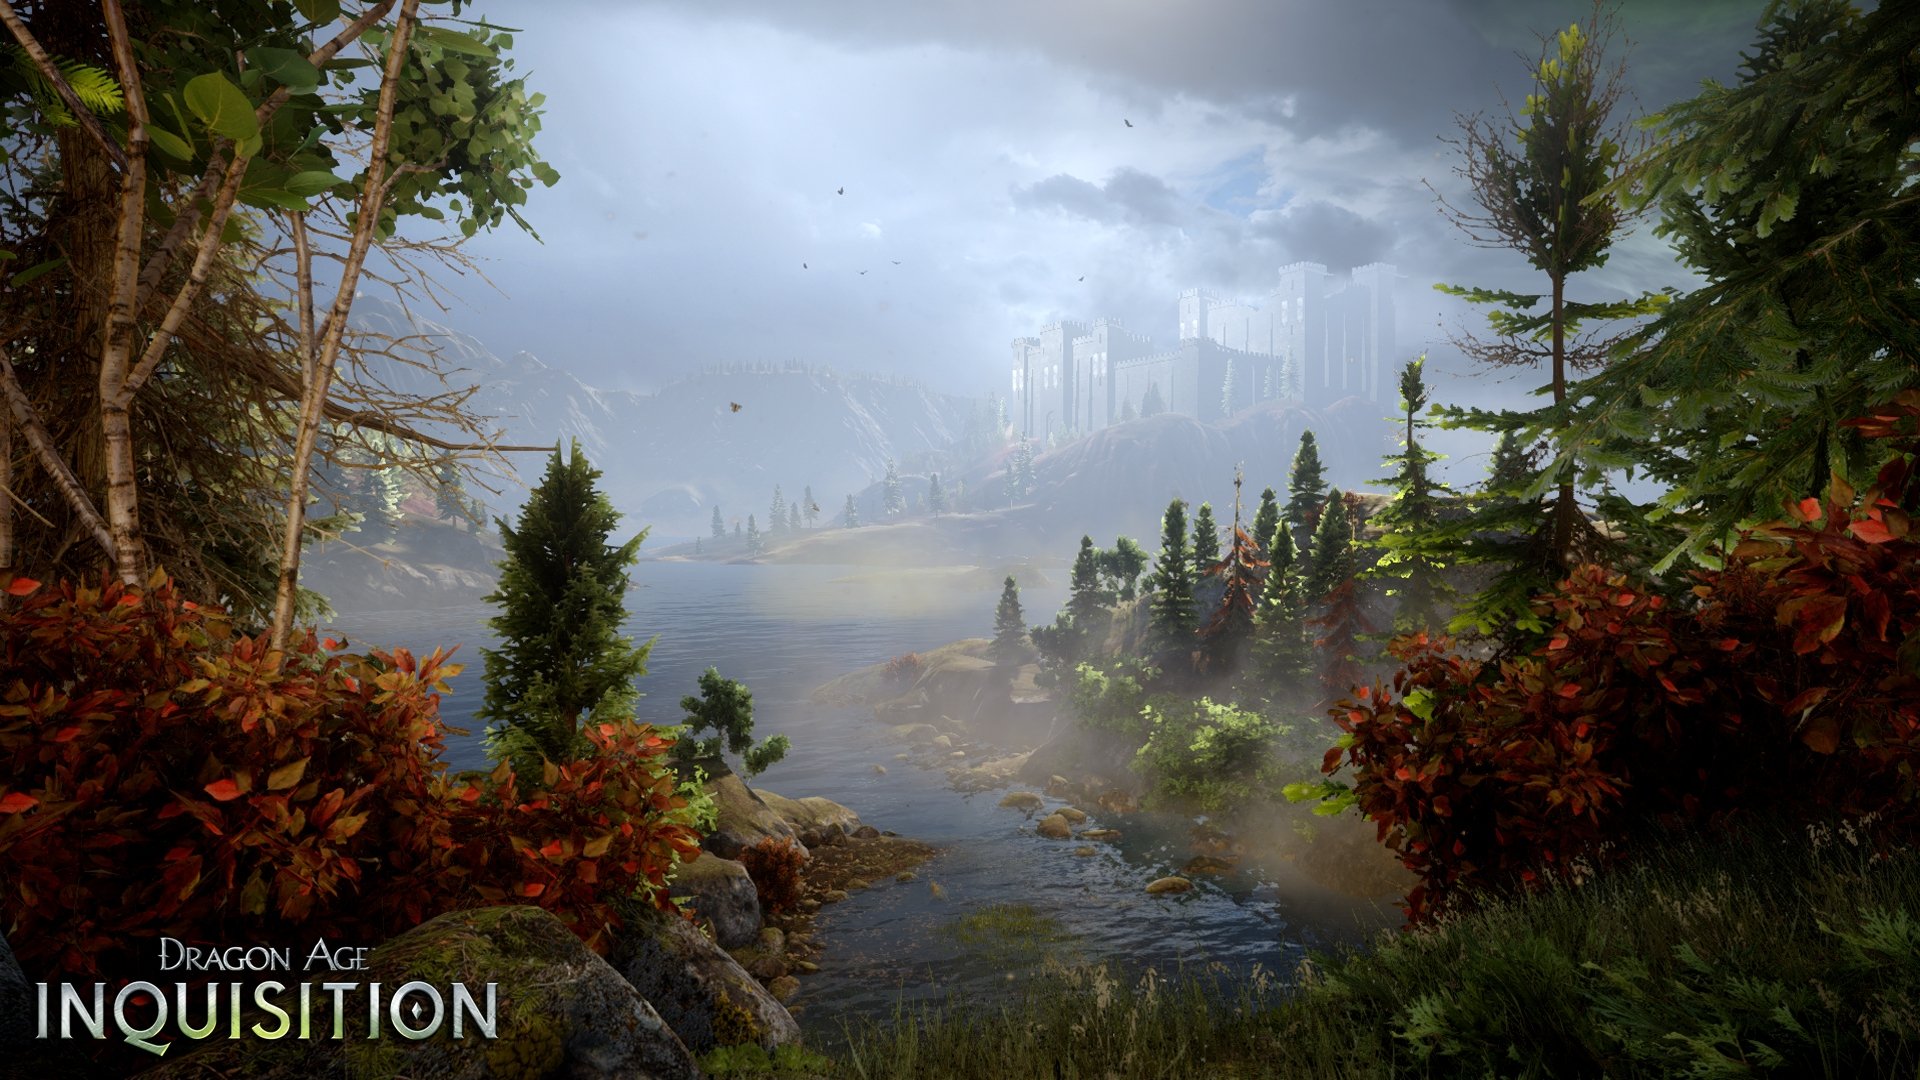 188 Dragon Age Inquisition HD Wallpapers Backgrounds   Wallpaper 1920x1080